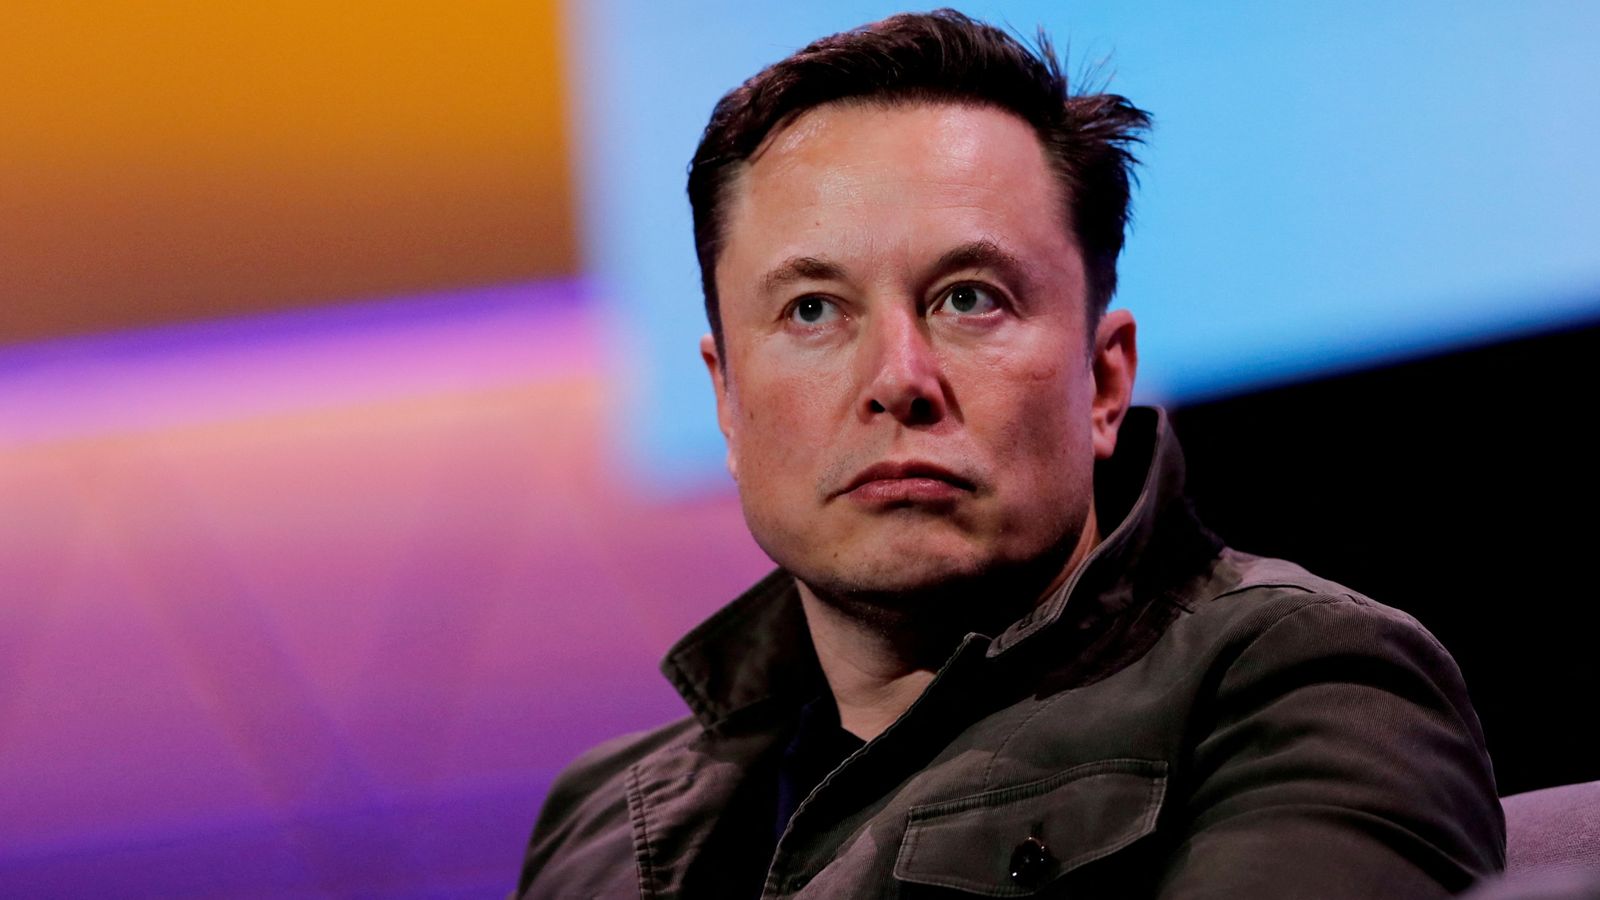 Elon Musk warned by European Union that Twitter will be banned unless he sticks to bloc’s digital rules – report